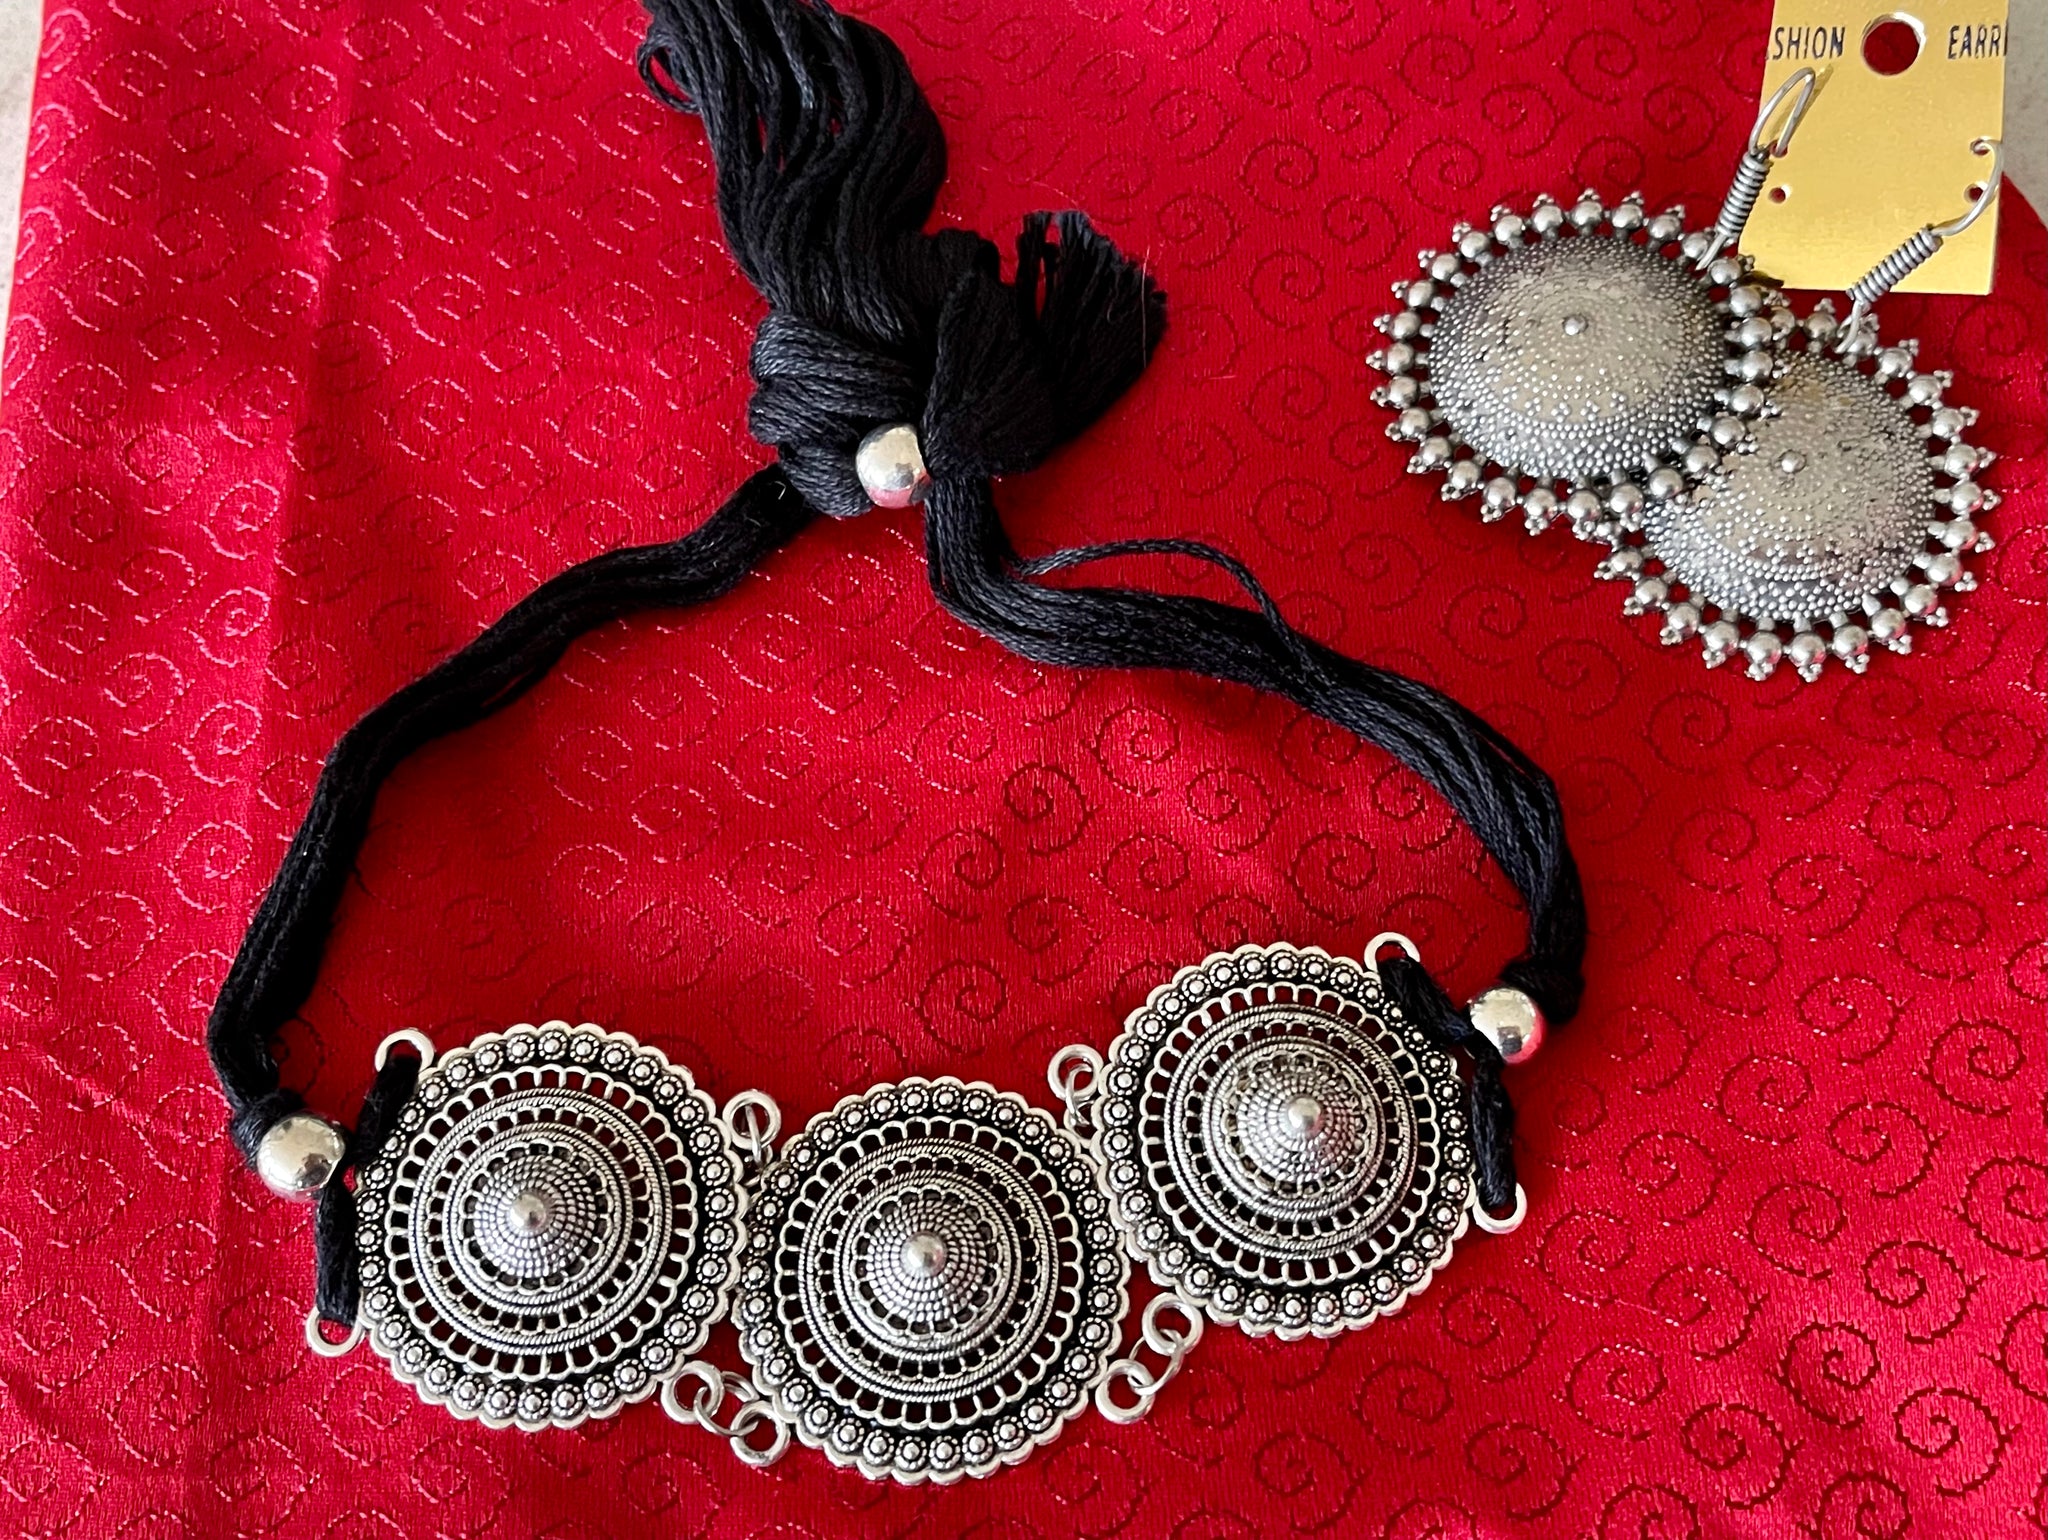 Black German Silver Ghungroo Necklace with Earring Set